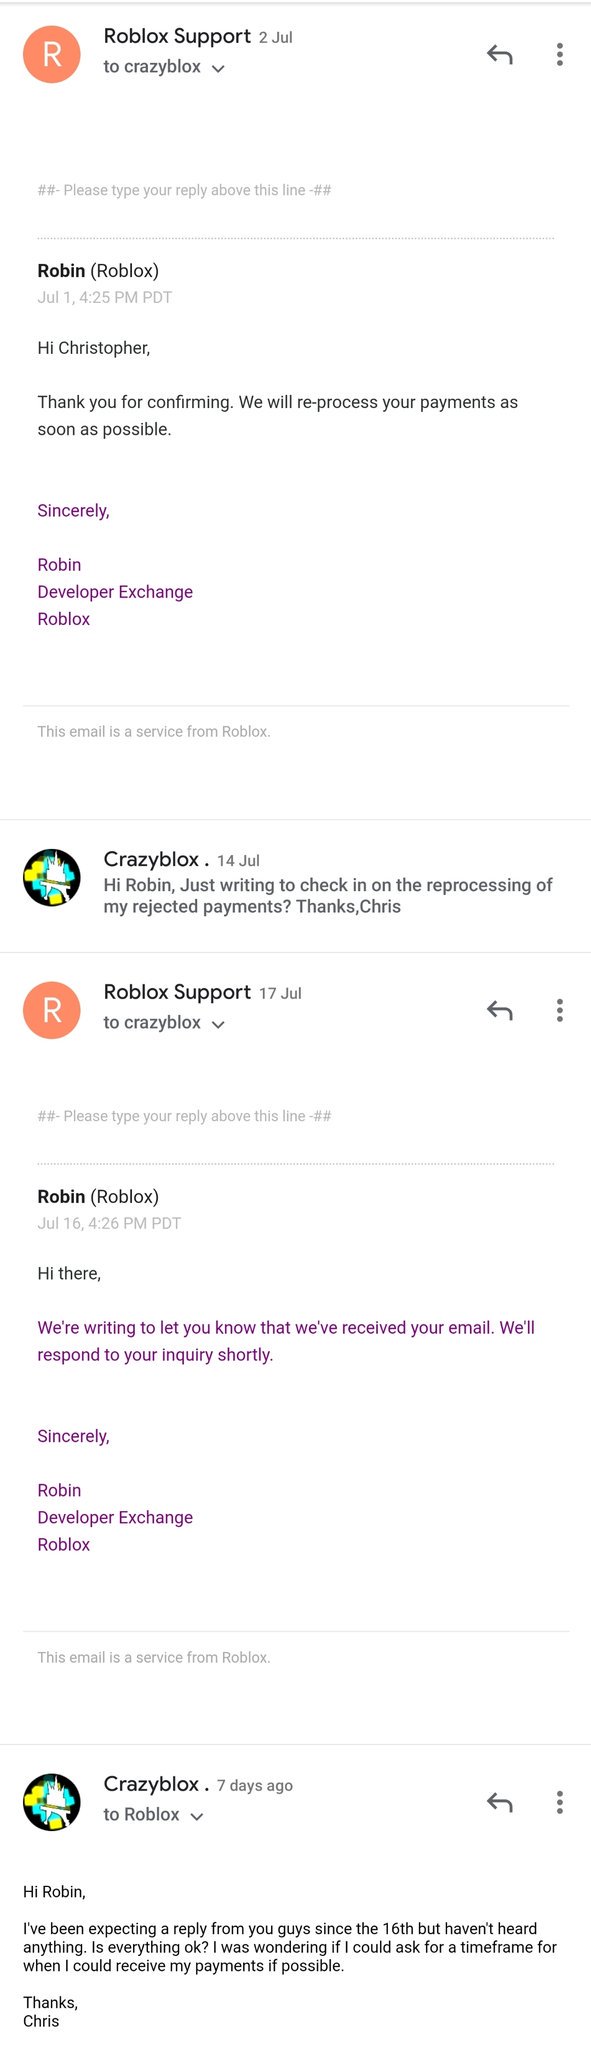 Crazyblox On Twitter Hi Roblox Robloxdevrel After Emails Spanning 3 Months I Ve Been Expecting 2 Rejected Payments To Be Re Processed As Soon As Possible Since The 1st Of This Month I Haven T - hi roblox